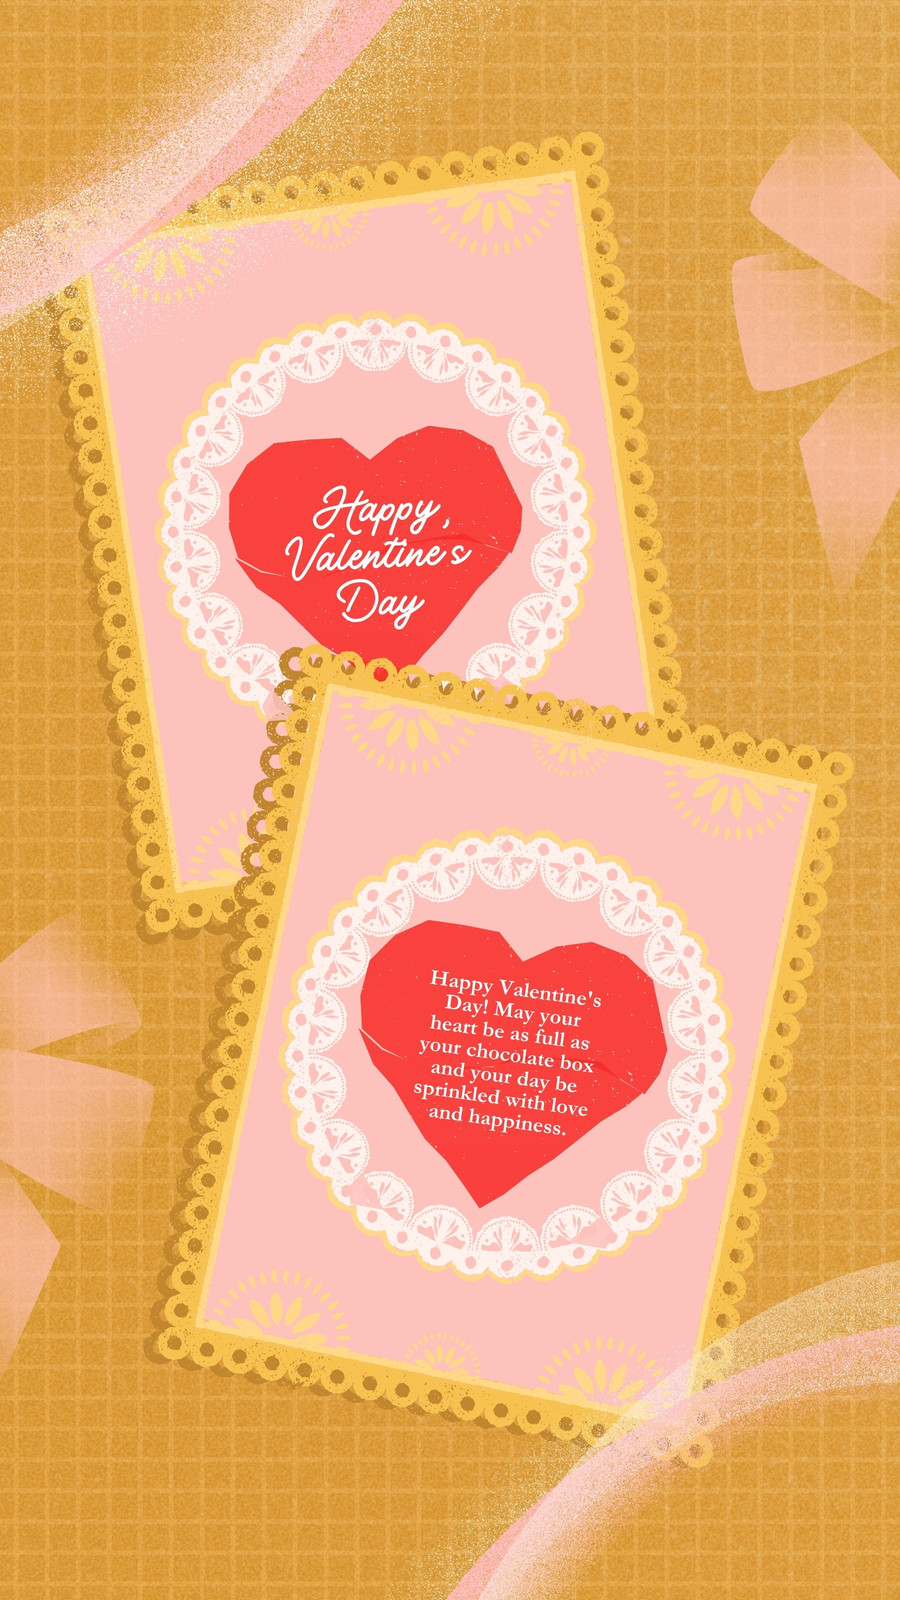 Page 19 - Free Valentine's Day Instagram Story templates